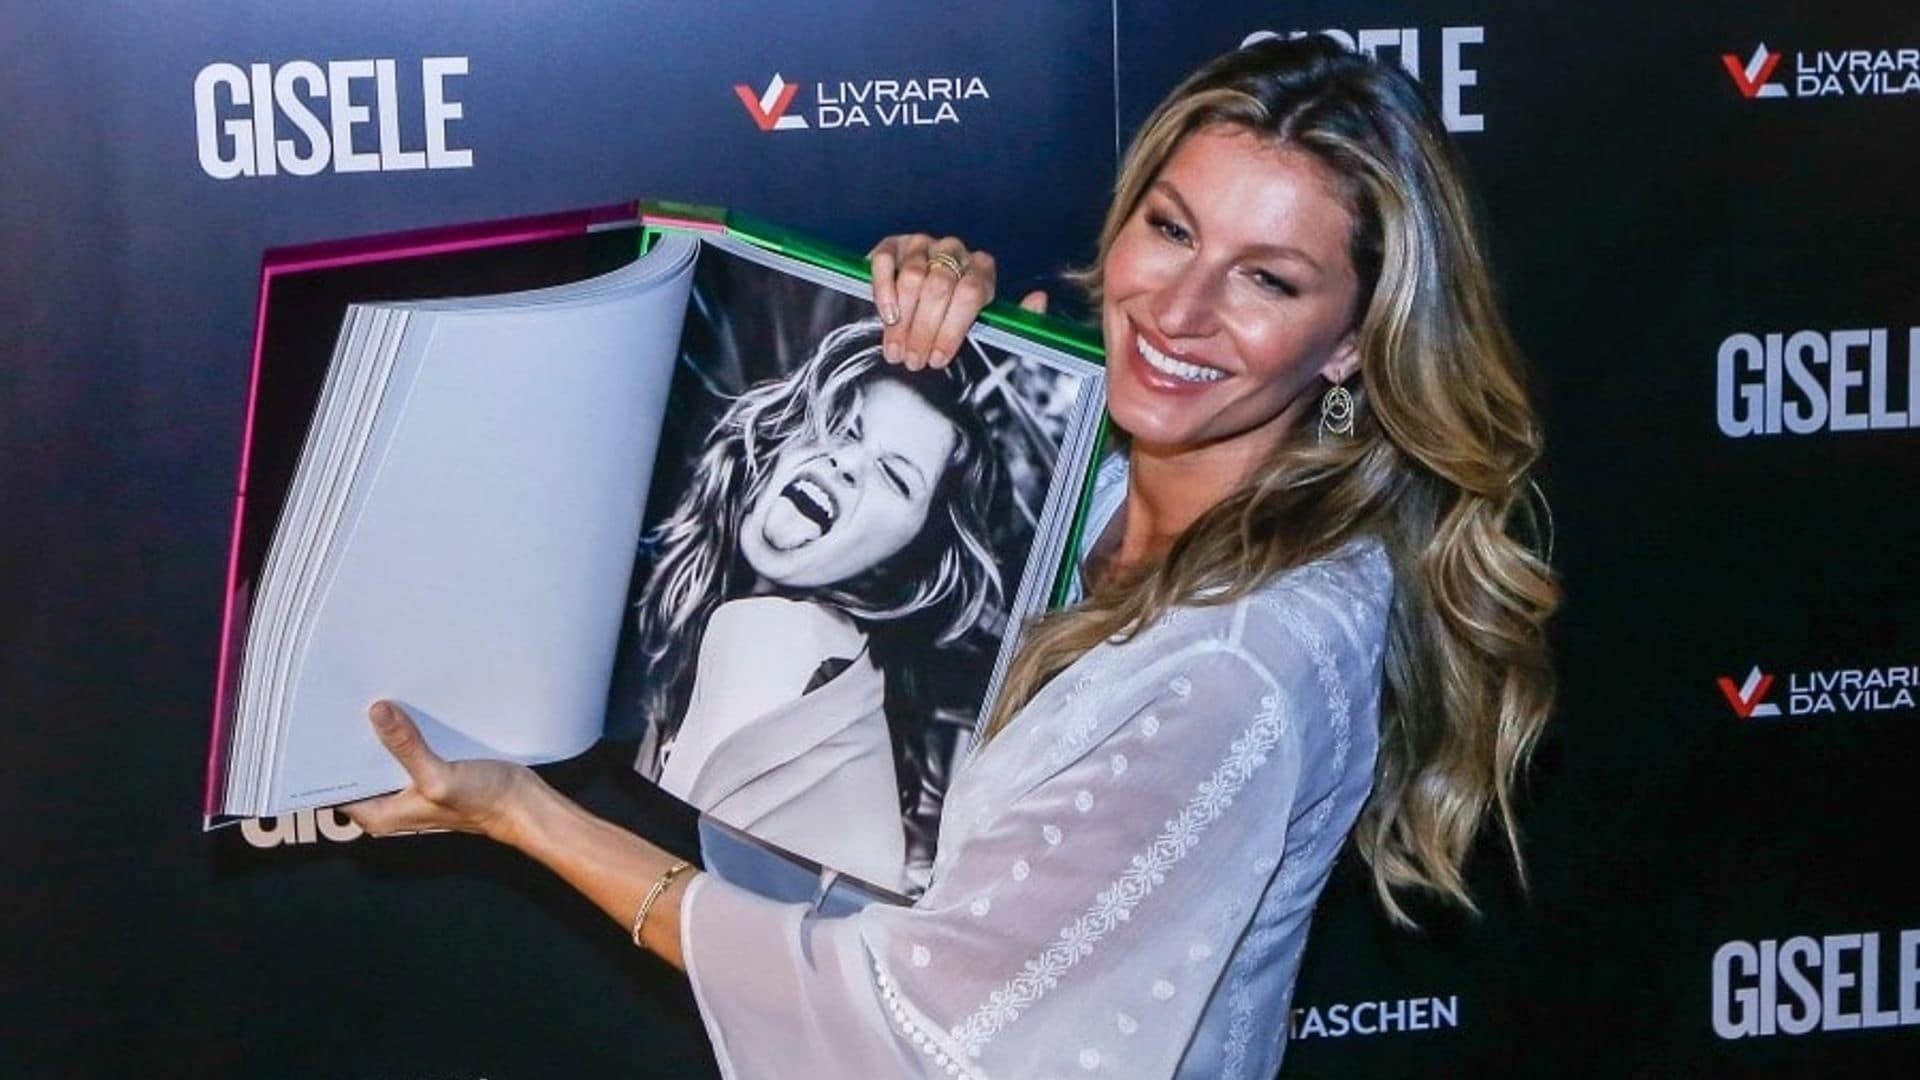 The reason a young Gisele Bündchen was told she would never be on a magazine cover